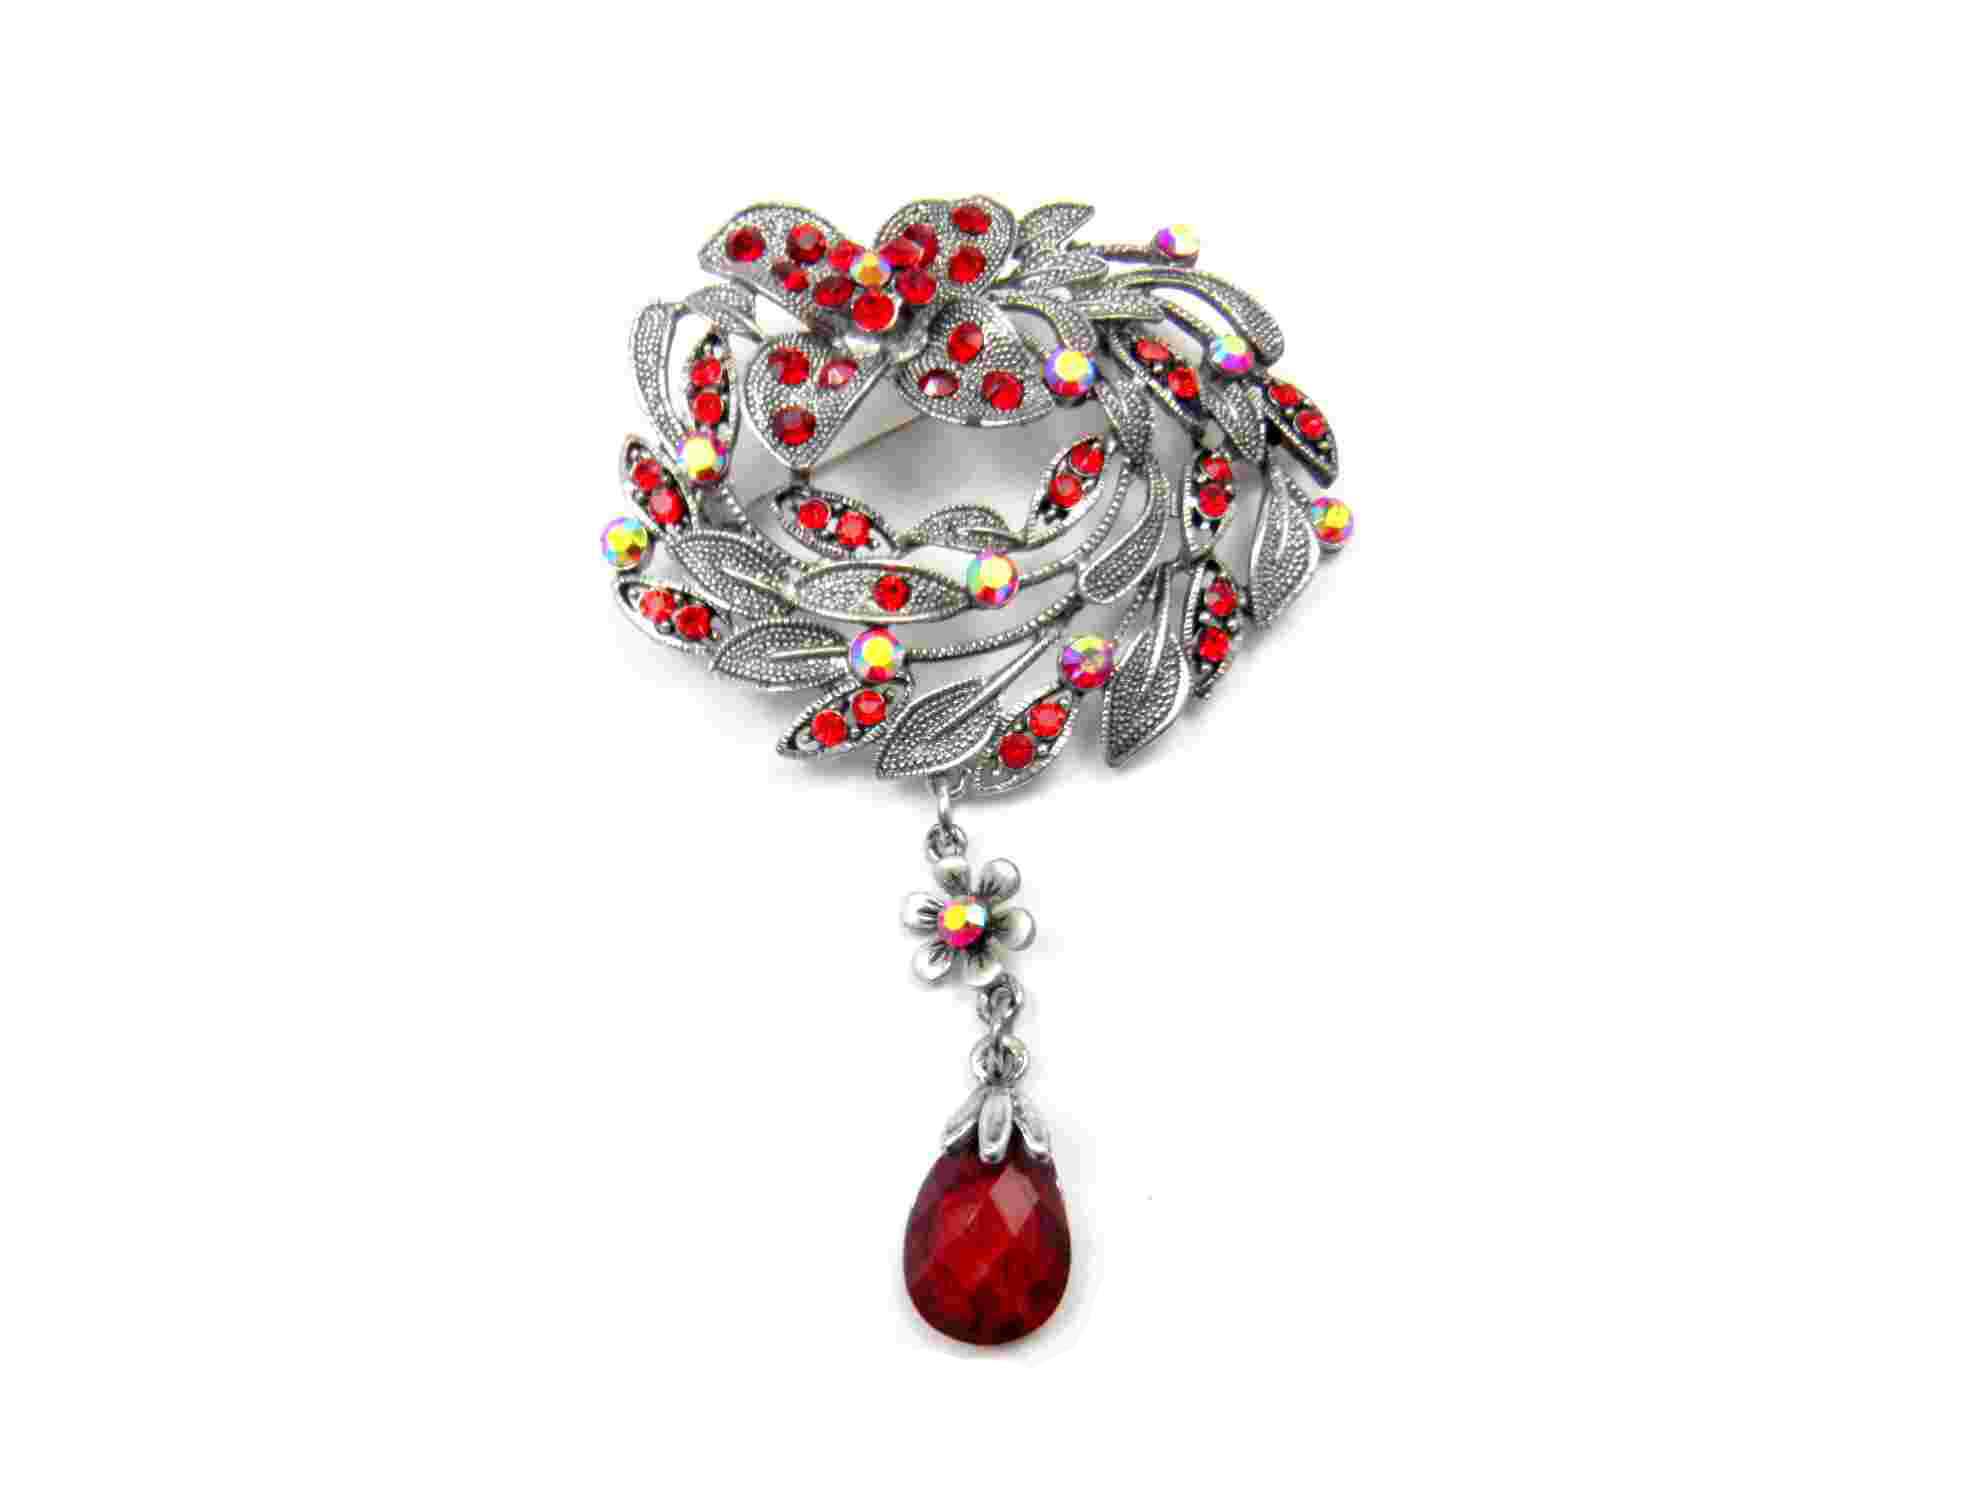 Fashionable brooch, made of zinc-alloy, glass and acrylic, available in various designs 